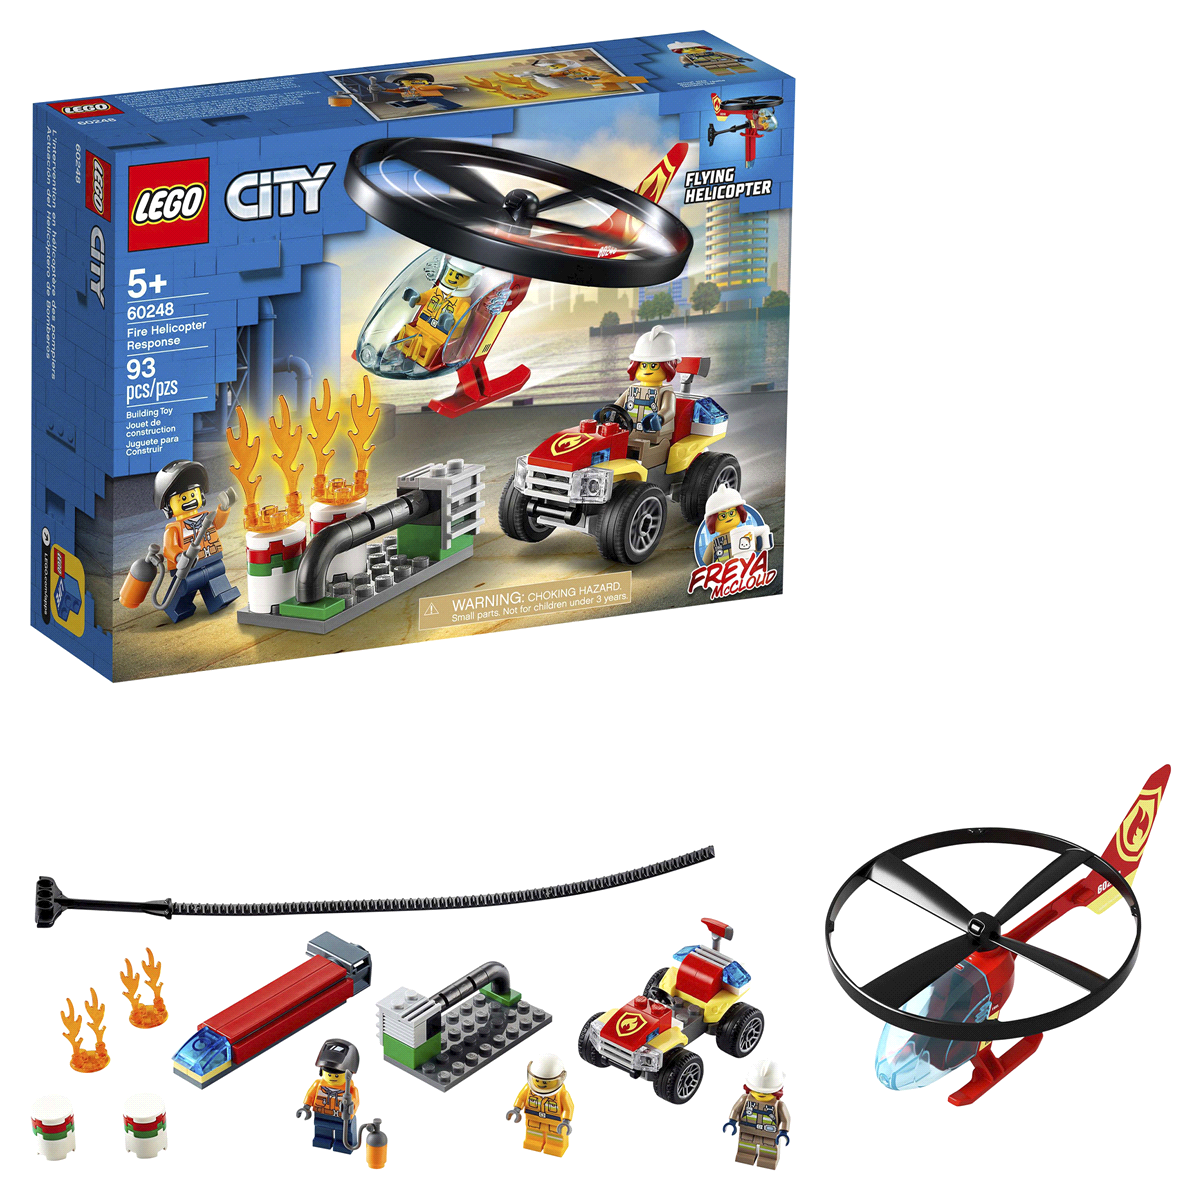 slide 1 of 1, LEGO City Fire Helicopter Response 60248 Firefighter Building Set, 1 ct